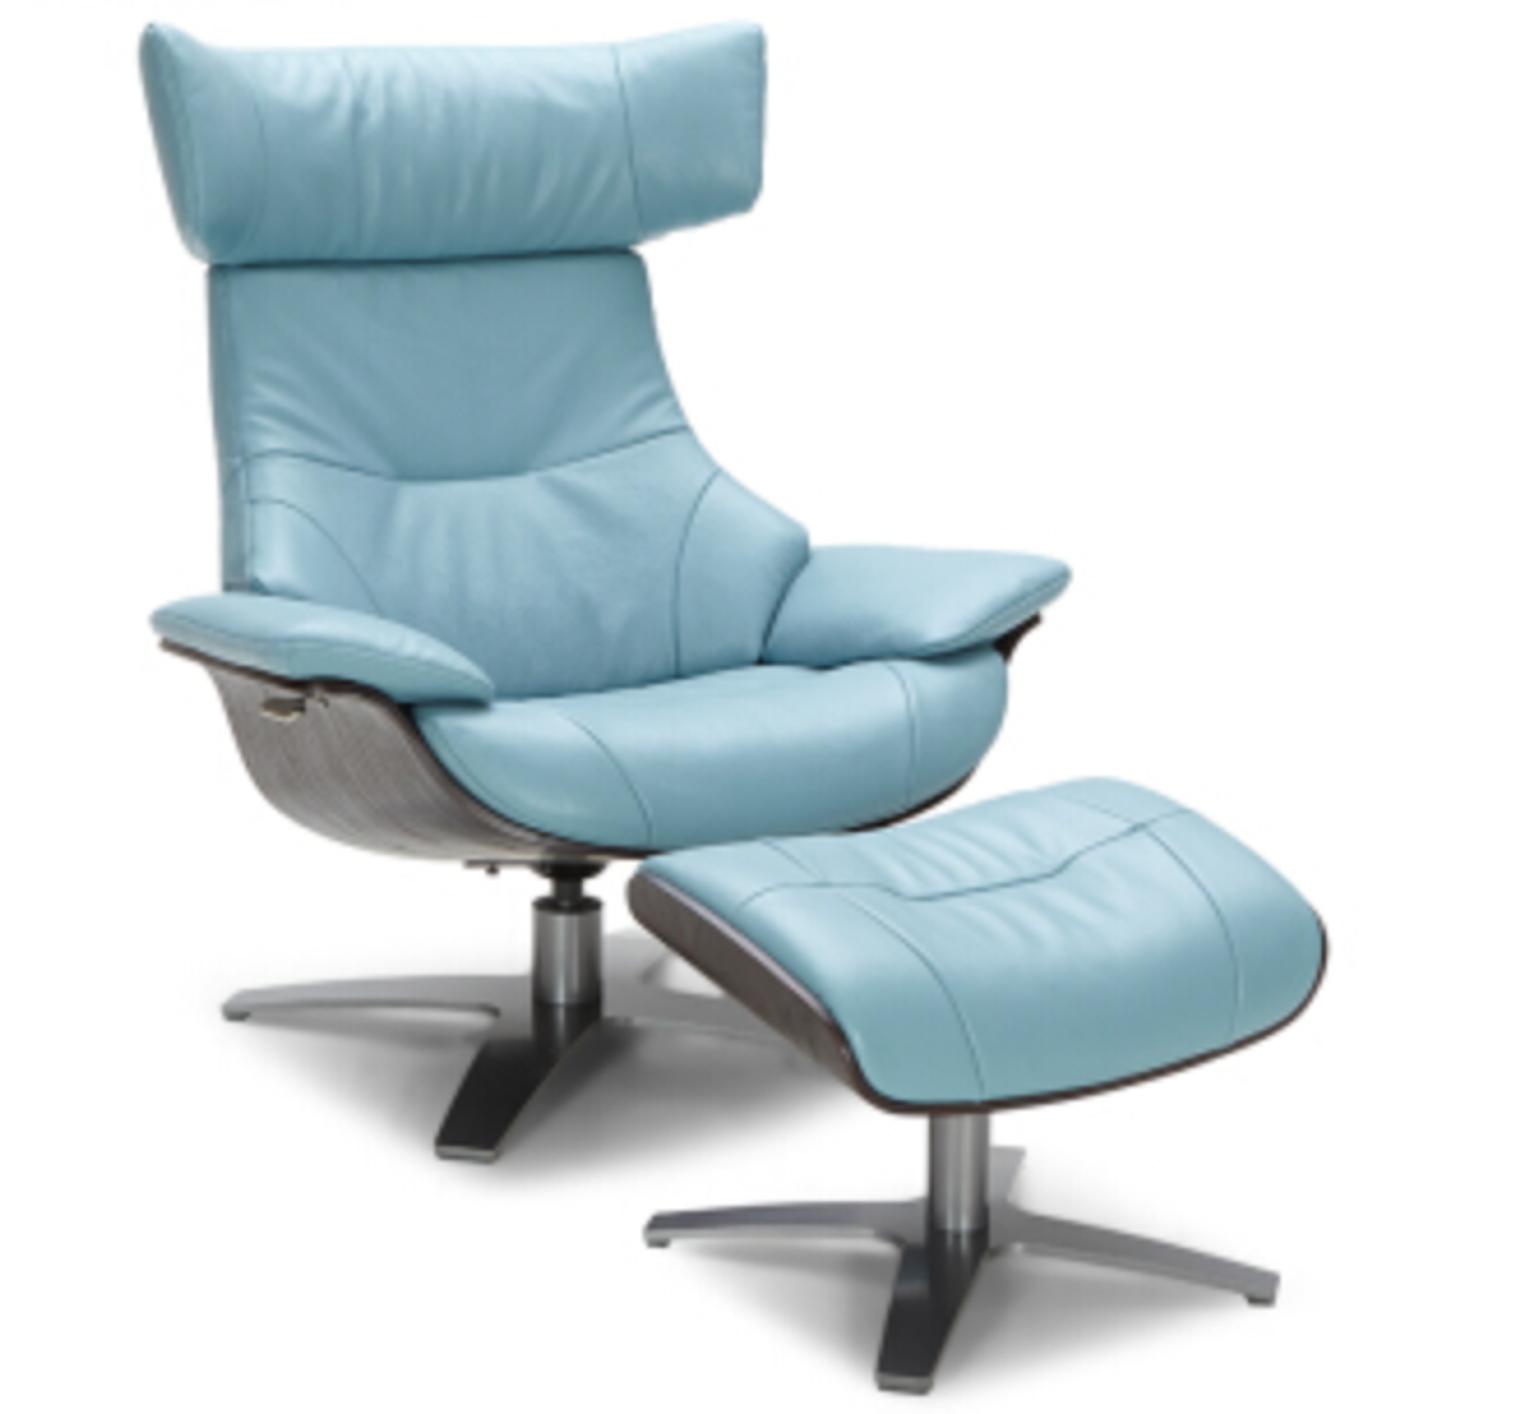 Blue Leather Swivel Armchair Footstool, Light Blue Leather Chair